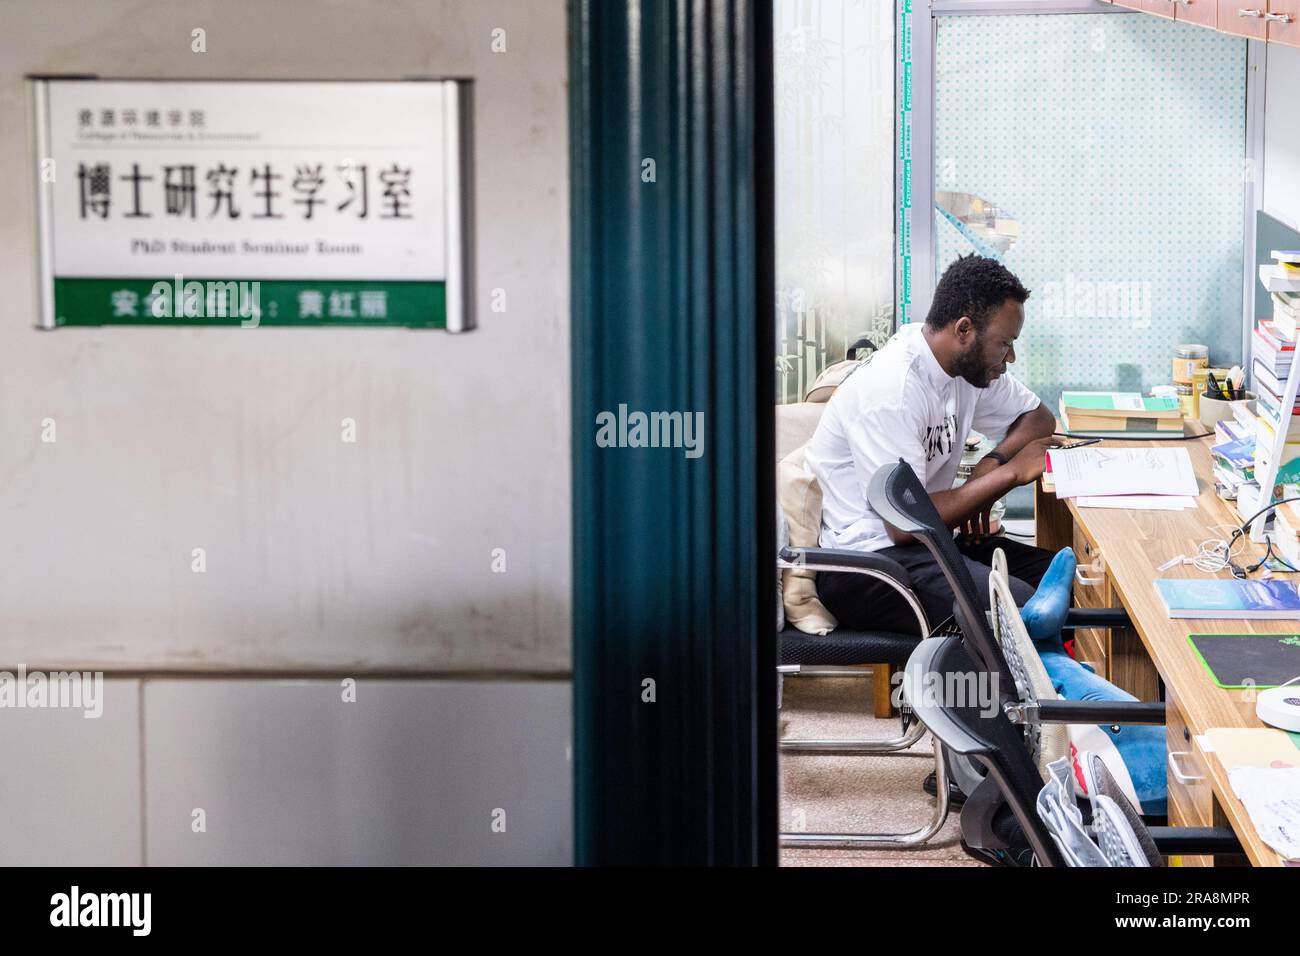 (230702) -- CHANGSHA, July 2, 2023 (Xinhua) -- Aguwa Dominic Ugochukwu studies at Hunan Agricultural University in Changsha, central China's Hunan Province, June 26, 2023. Aguwa Dominic Ugochukwu, 25, is a Nigerian doctoral student at Hunan Agricultural University. Inspired by his family's involvement in agriculture-related business and their importation of farming equipment and supplies from China, Dominic made up his mind to come to China to acquire modern agricultural knowledge.Currently, Dominic's research primarily focuses on the control and remediation of pollution in arable land. His in Stock Photo